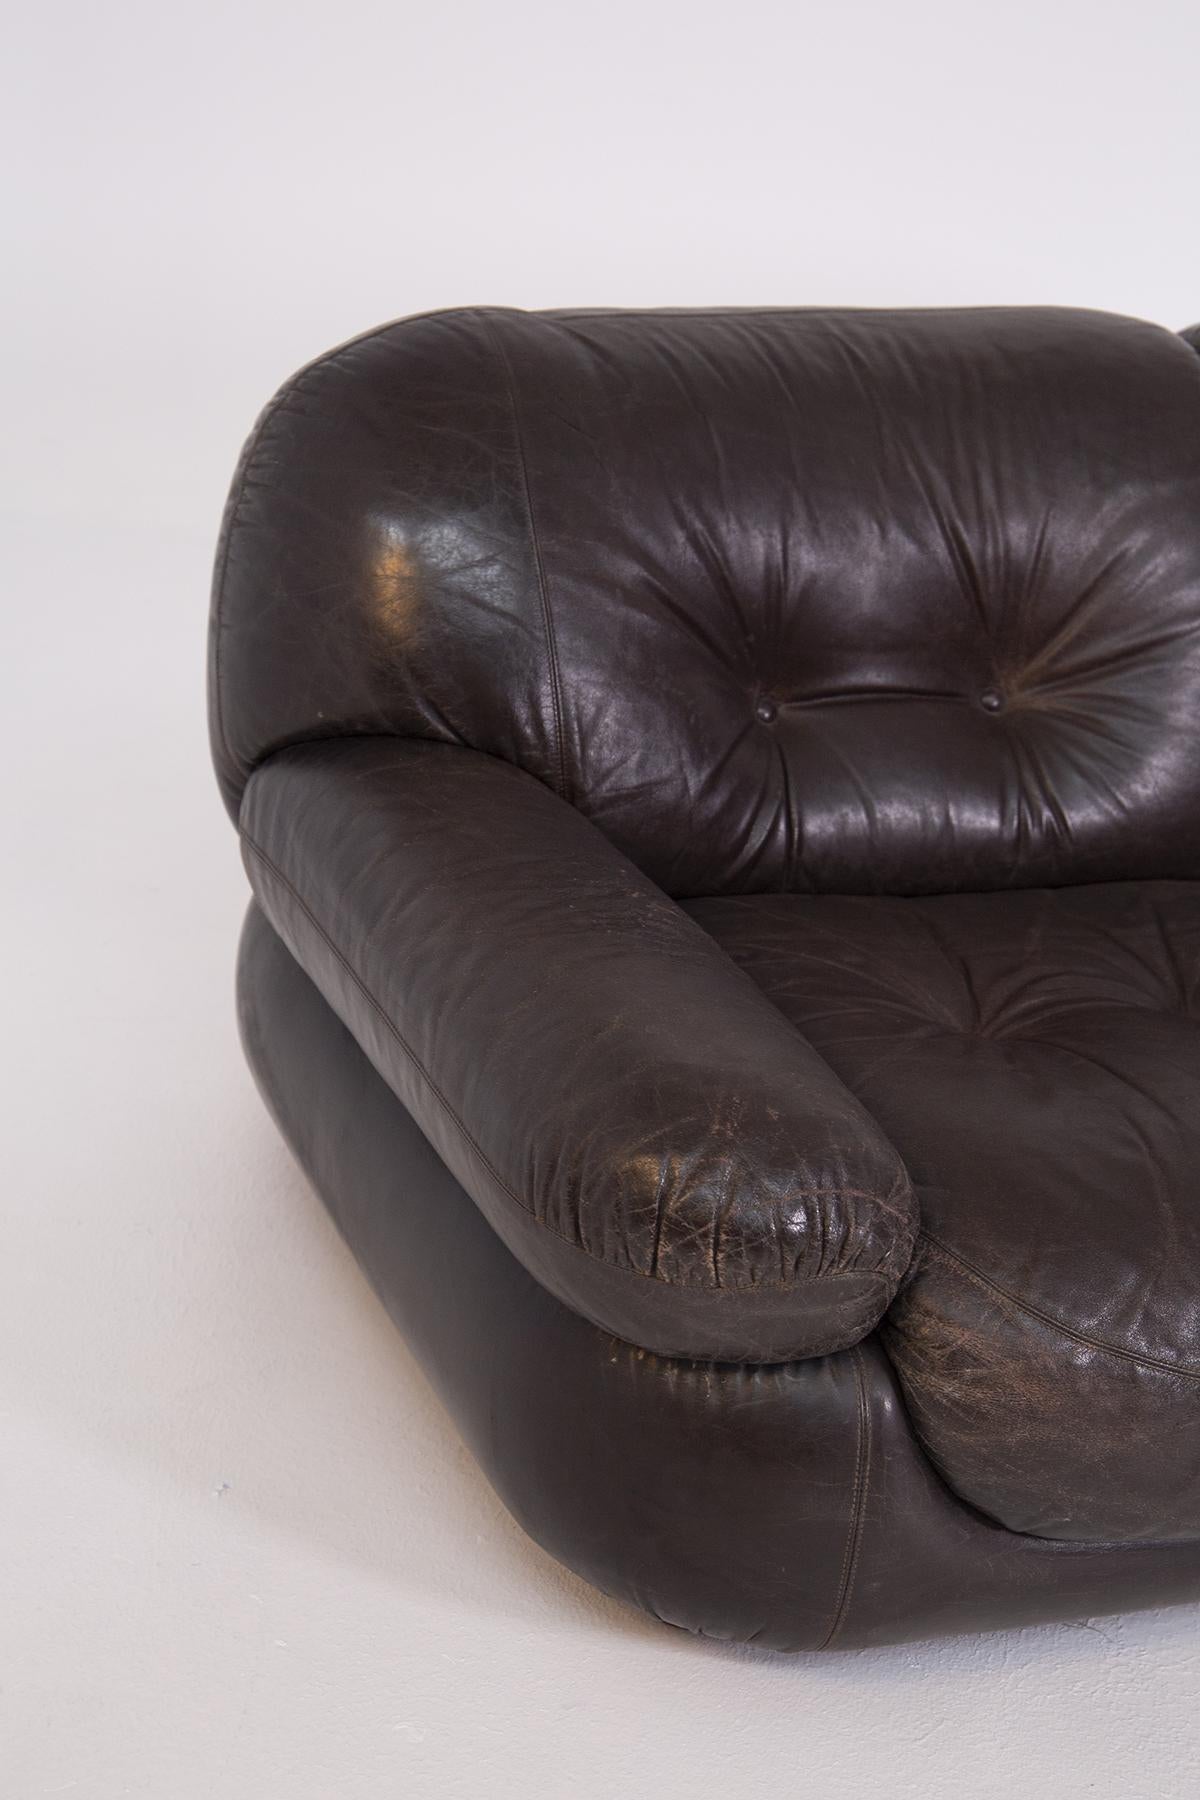 Original Italian sofa from the 70's in brown leather.
The sofa is made entirely of leather. The peculiarity of the sofa are its soft and rounded shapes. In fact, each of its elements consists of a circular cushion that give softness and warmth to